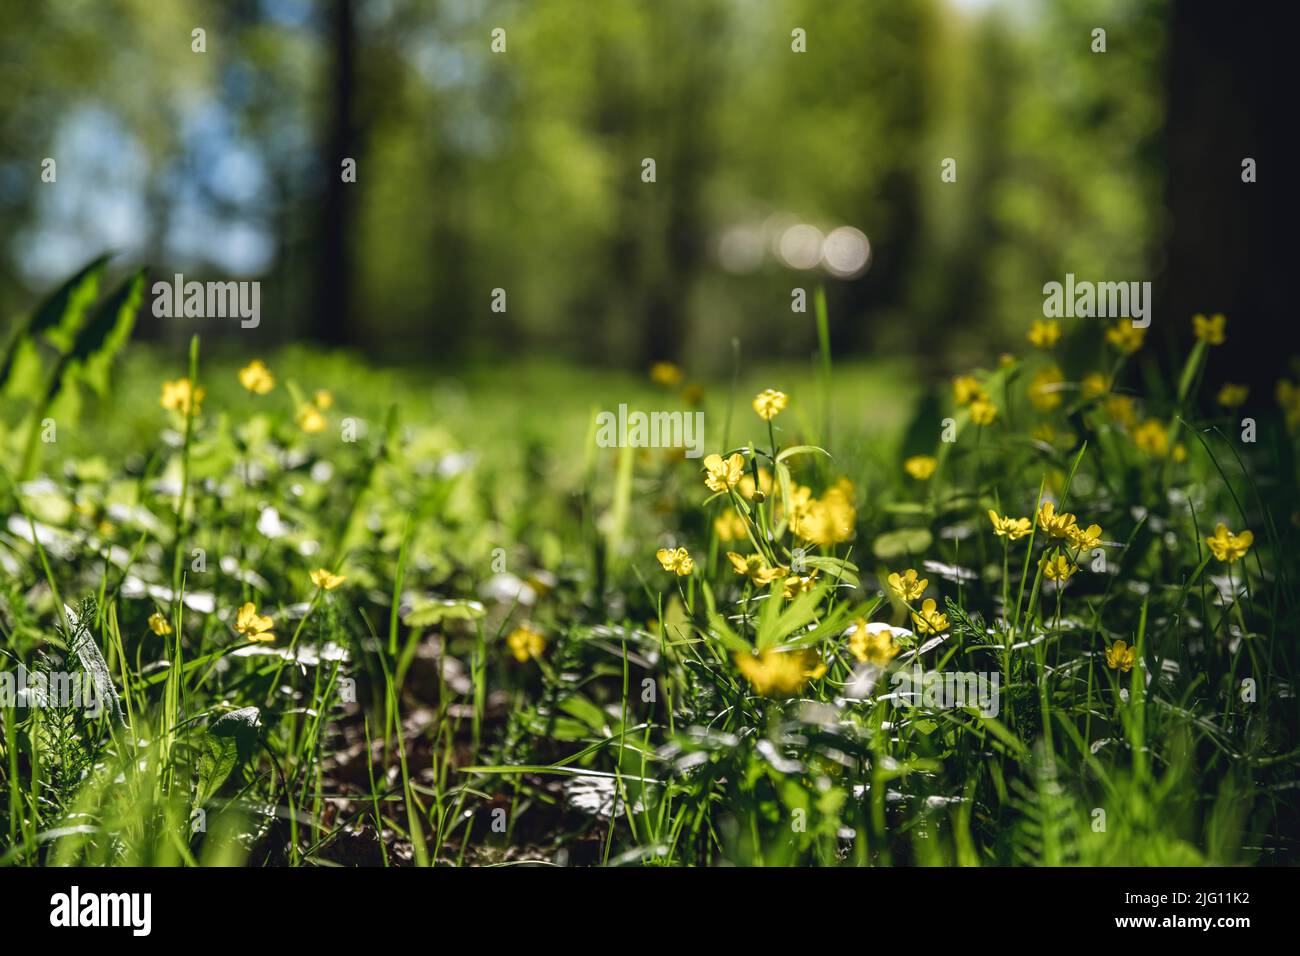 yellow buttercup flowers Ranunculus cassubicus in the forest Stock Photo